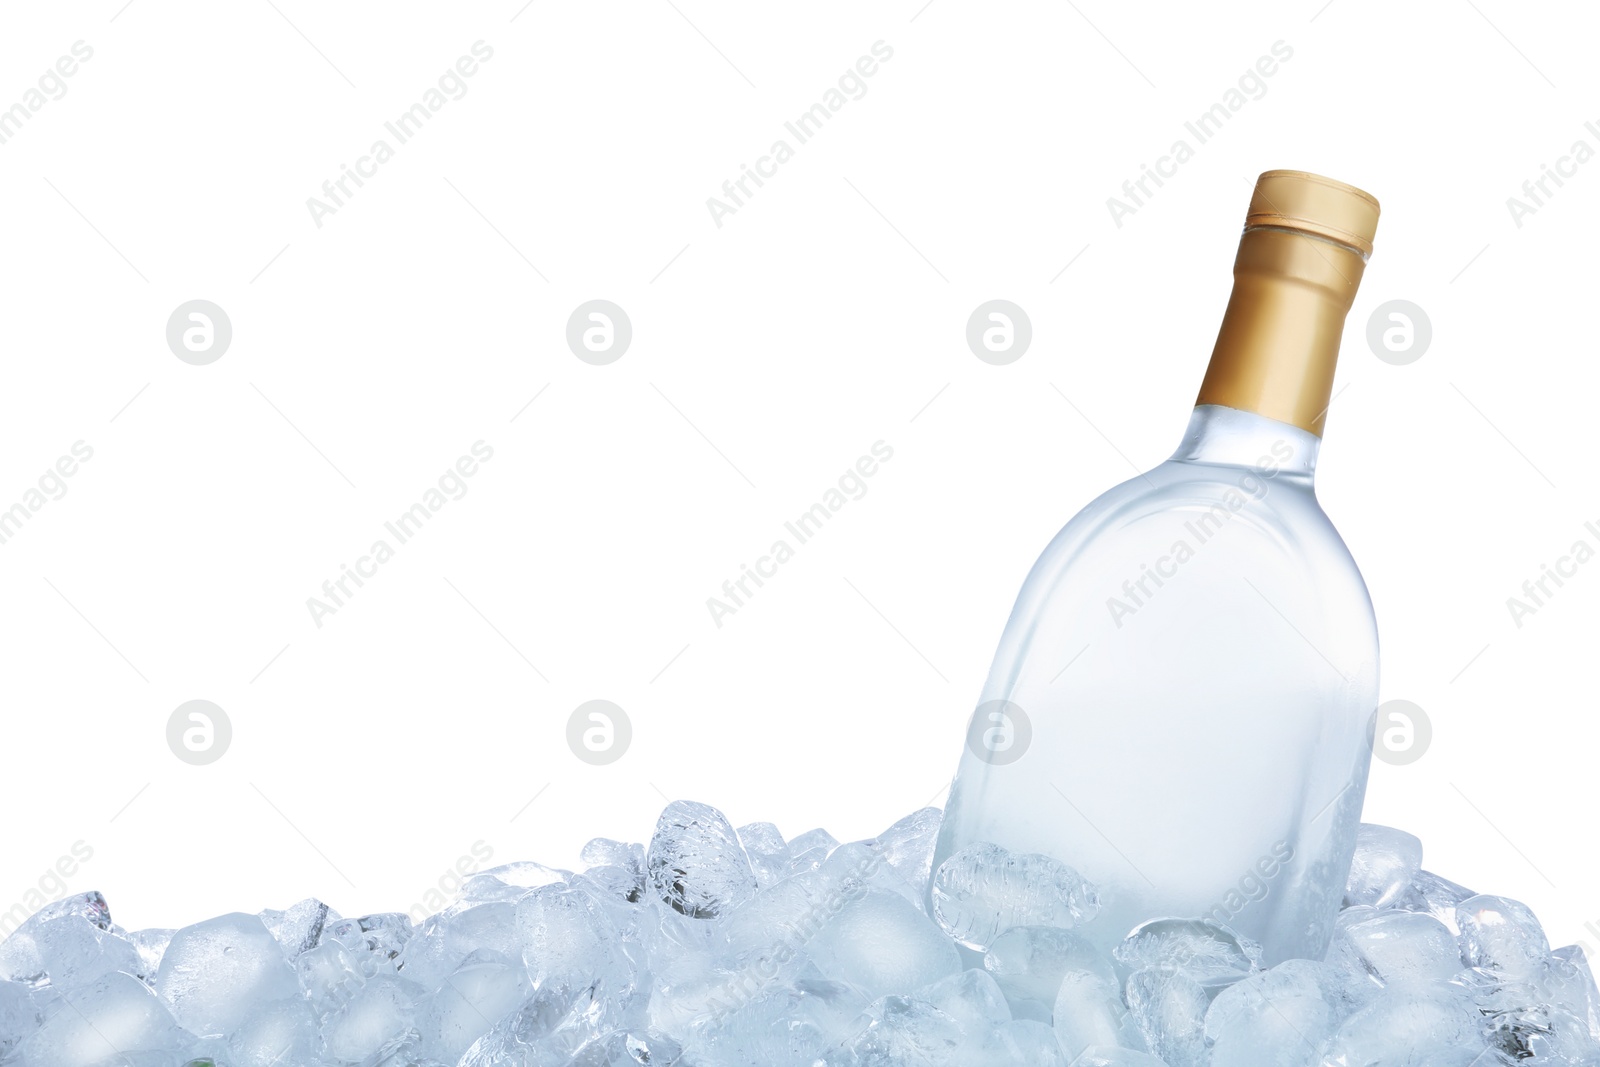 Photo of Ice cubes and bottle of vodka on white background